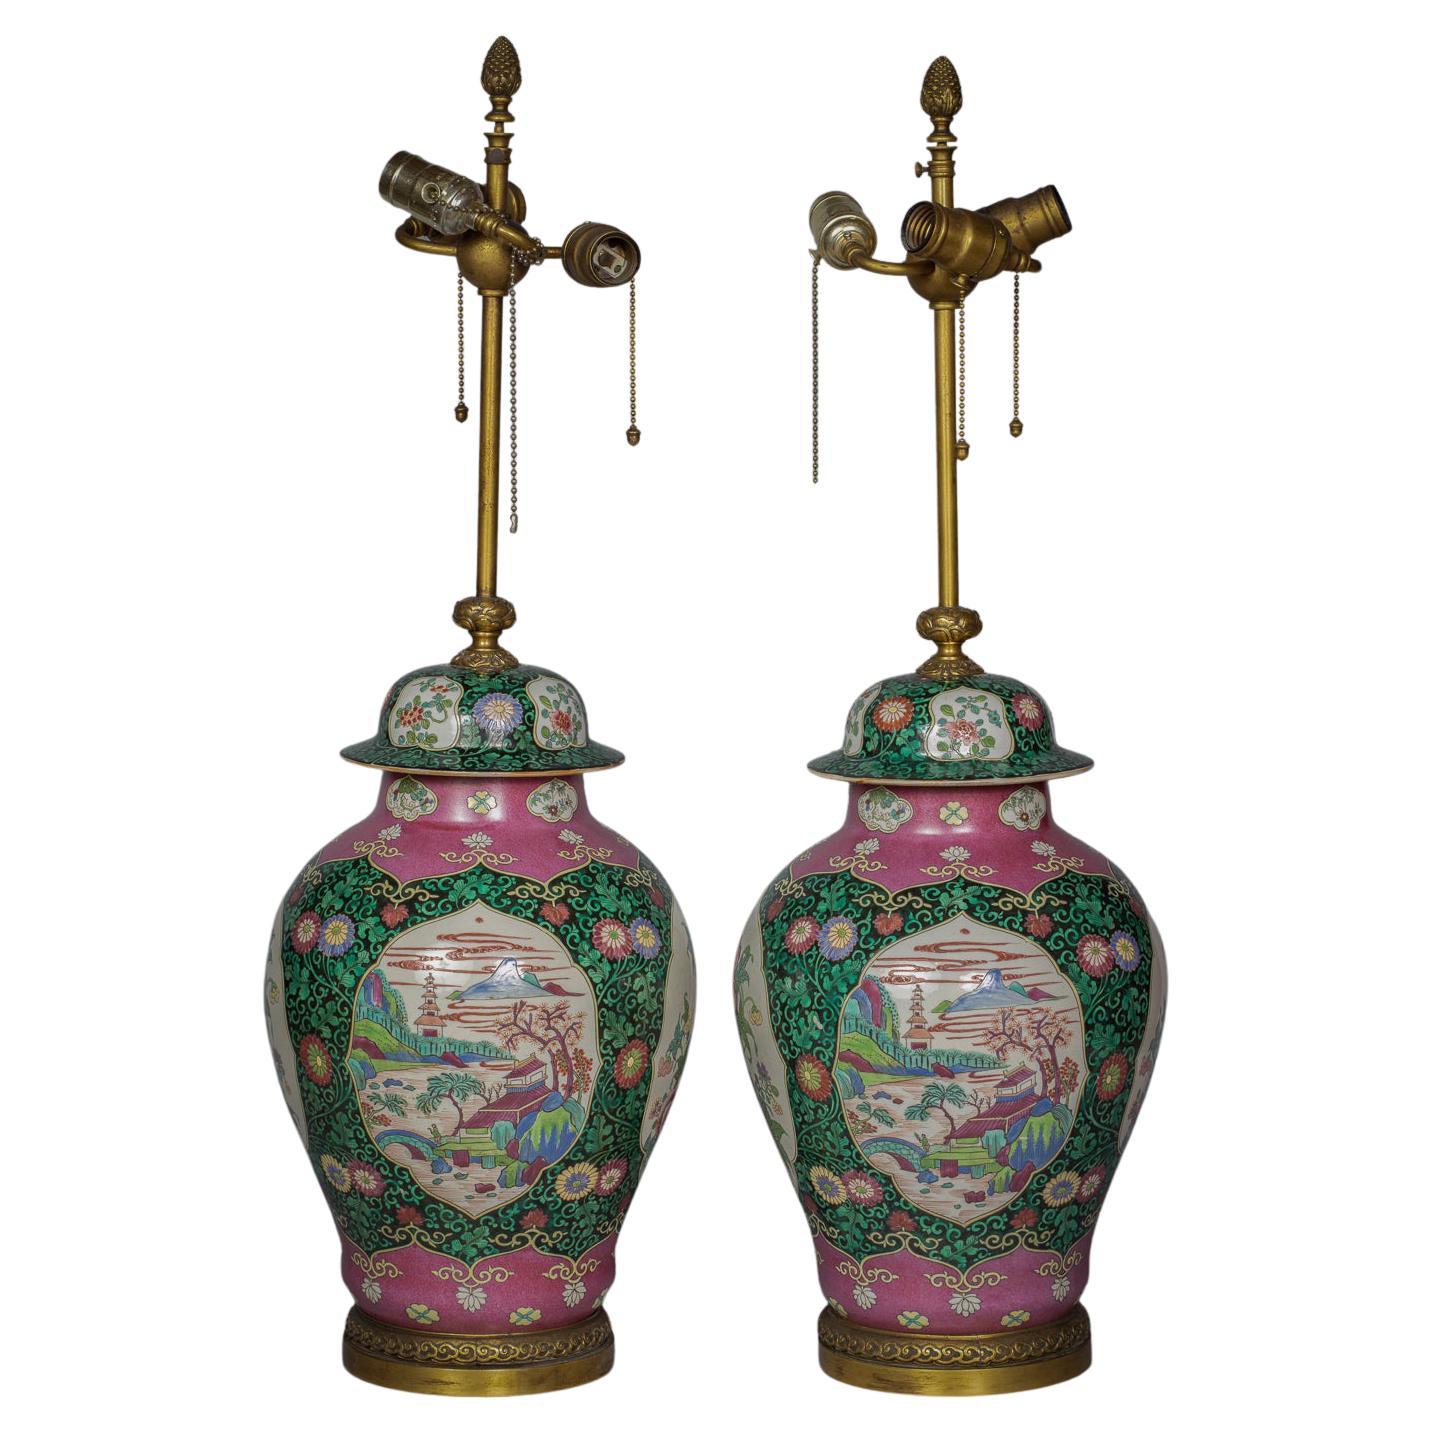 Pair of Bronze Mounted French Porcelain Covered Vases as Lamps, circa 1900